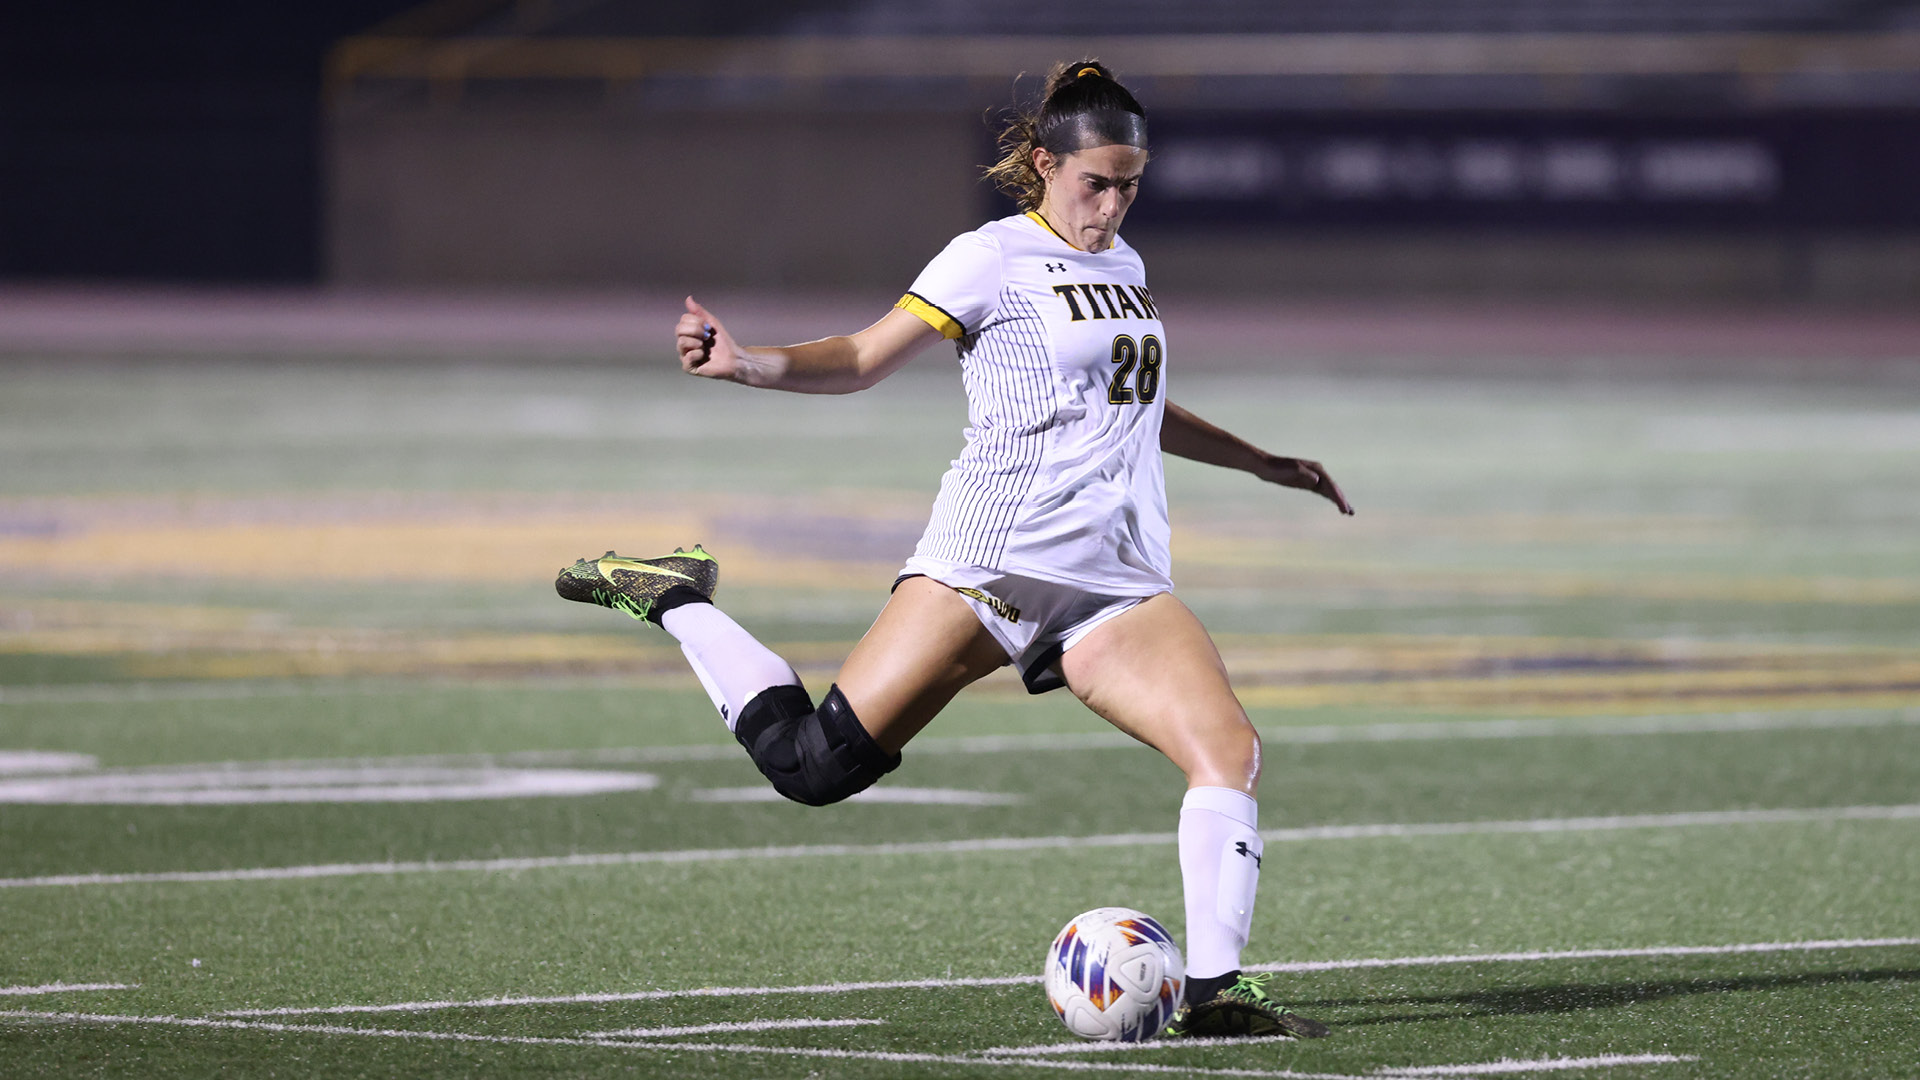 Kate Whitney scored the Titans' goal on a free kick in the 11th minute